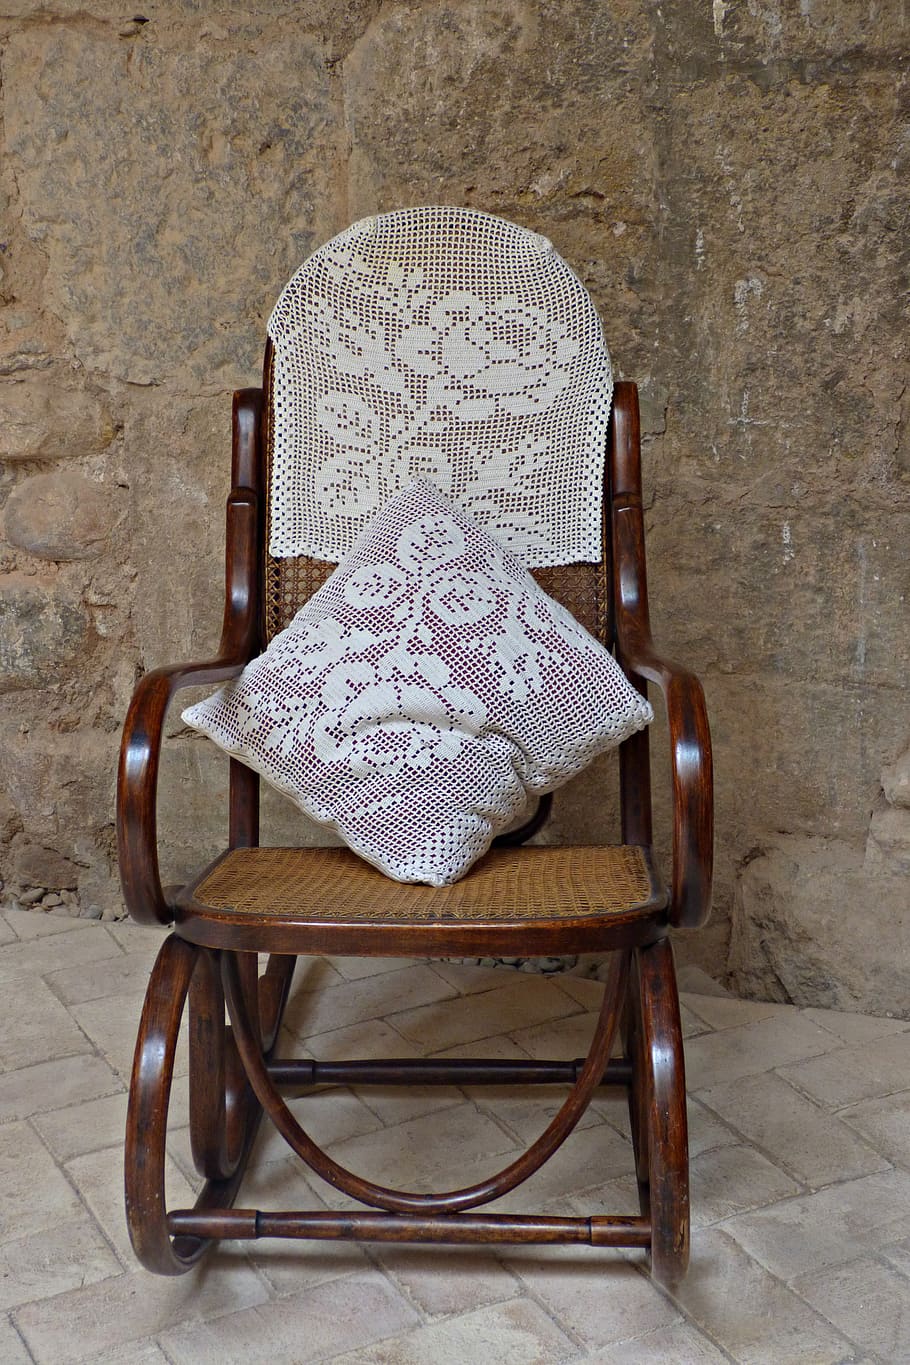 rocking chair, vintage, memories, furniture, old, nostalgia, wicker, chairs, rolling, retro